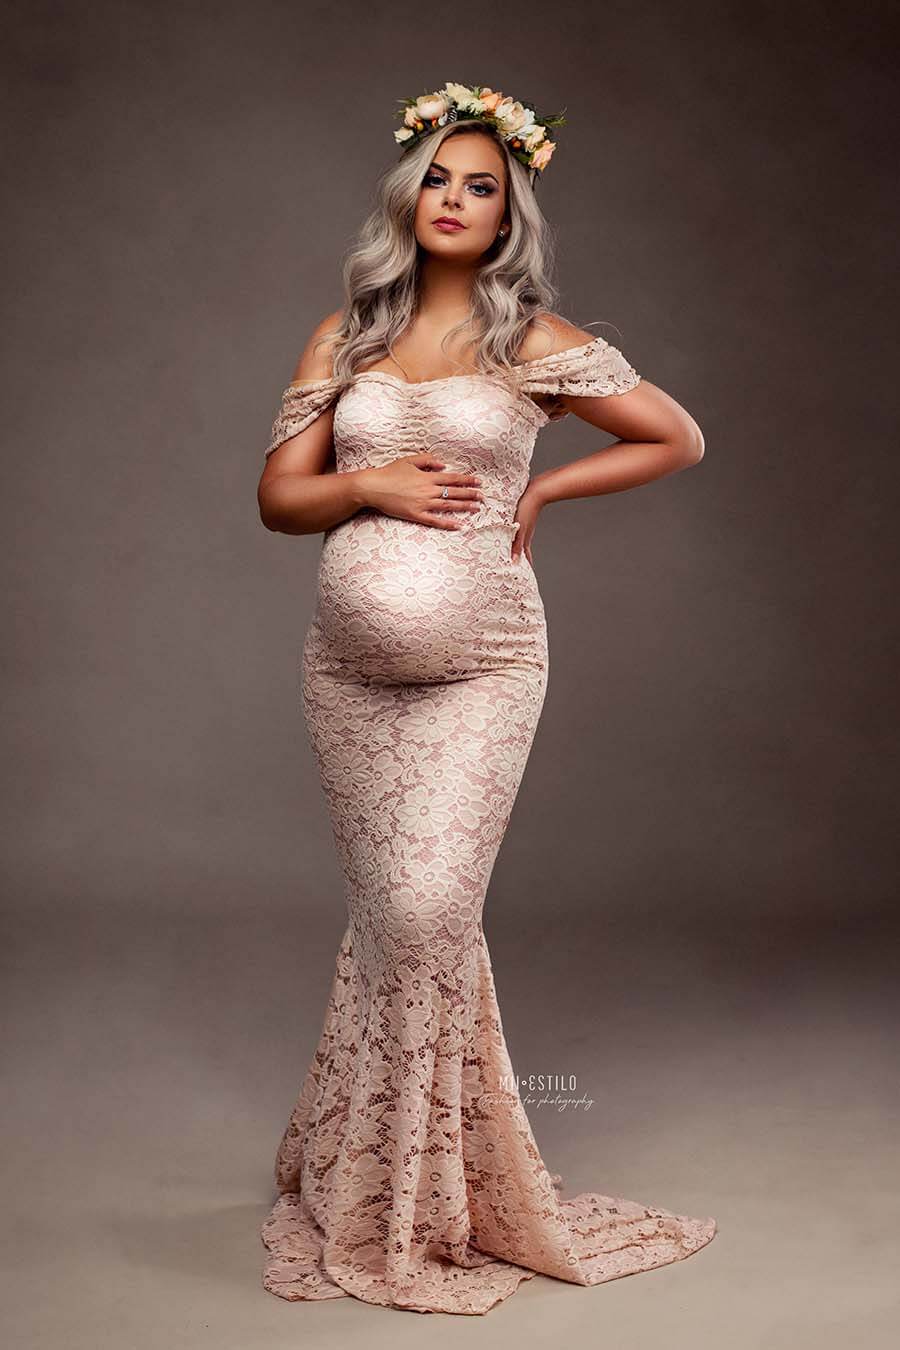 This pregnant woman is wearing a long dusty pink dress. The dress has drop sleeves and is made out of lace. underneath the lace is a jersey layer attached so the dress isn&